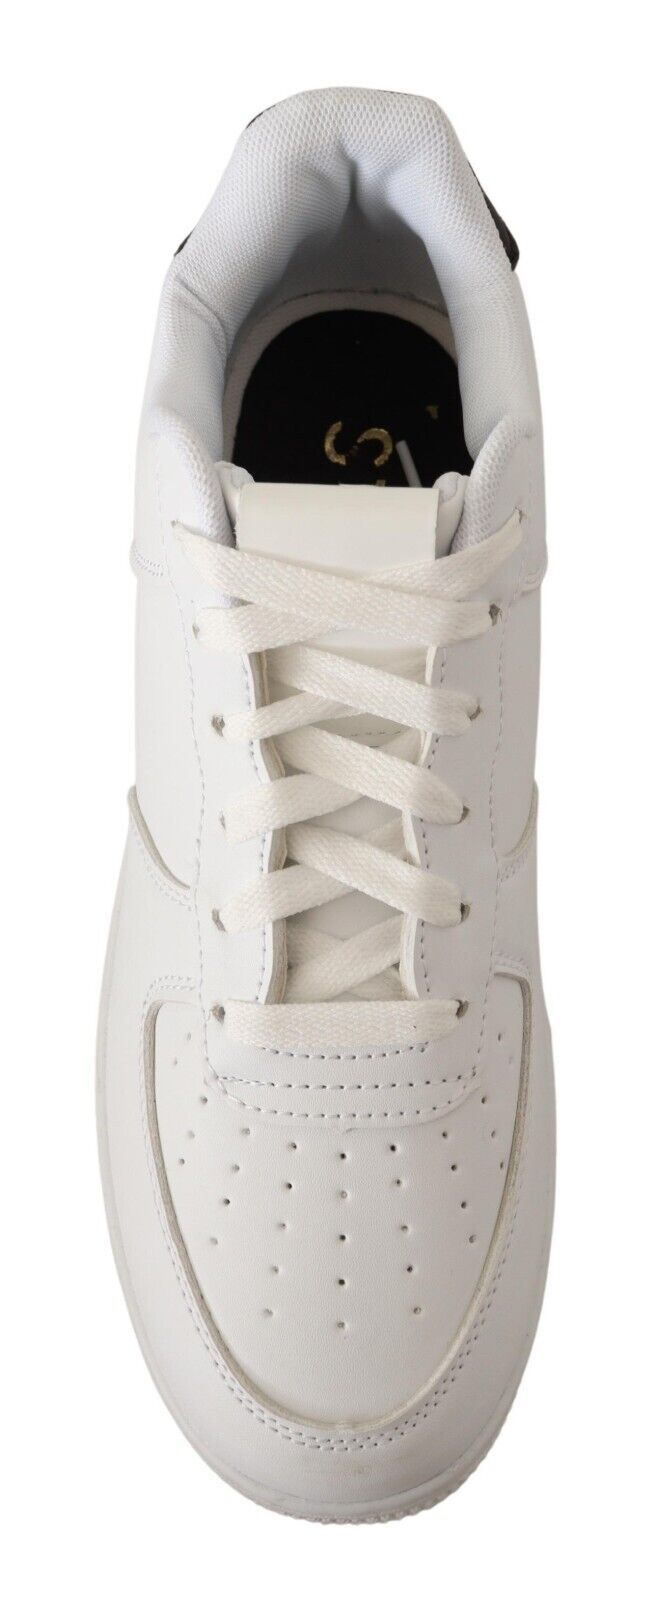 SIGNS Chic White Leather Low Top Men's Sneakers